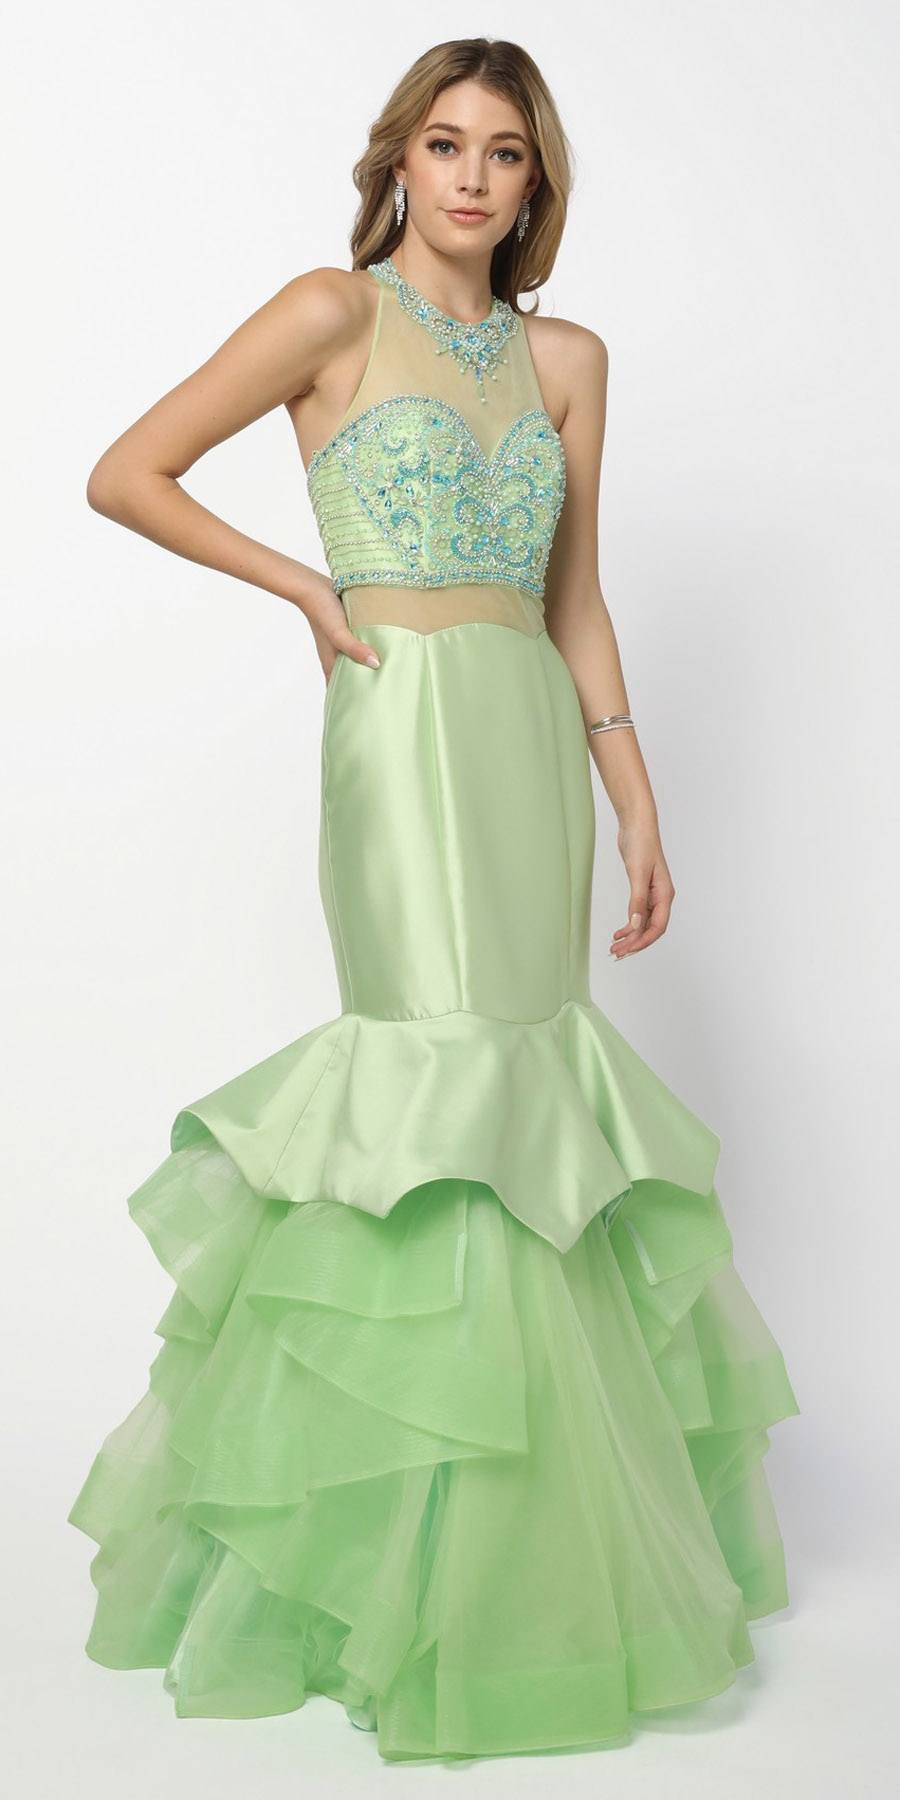 Nox Anabel 8332 Pistachio-Green Mock Two-Piece Embellished Tiered Mermaid Prom Gown